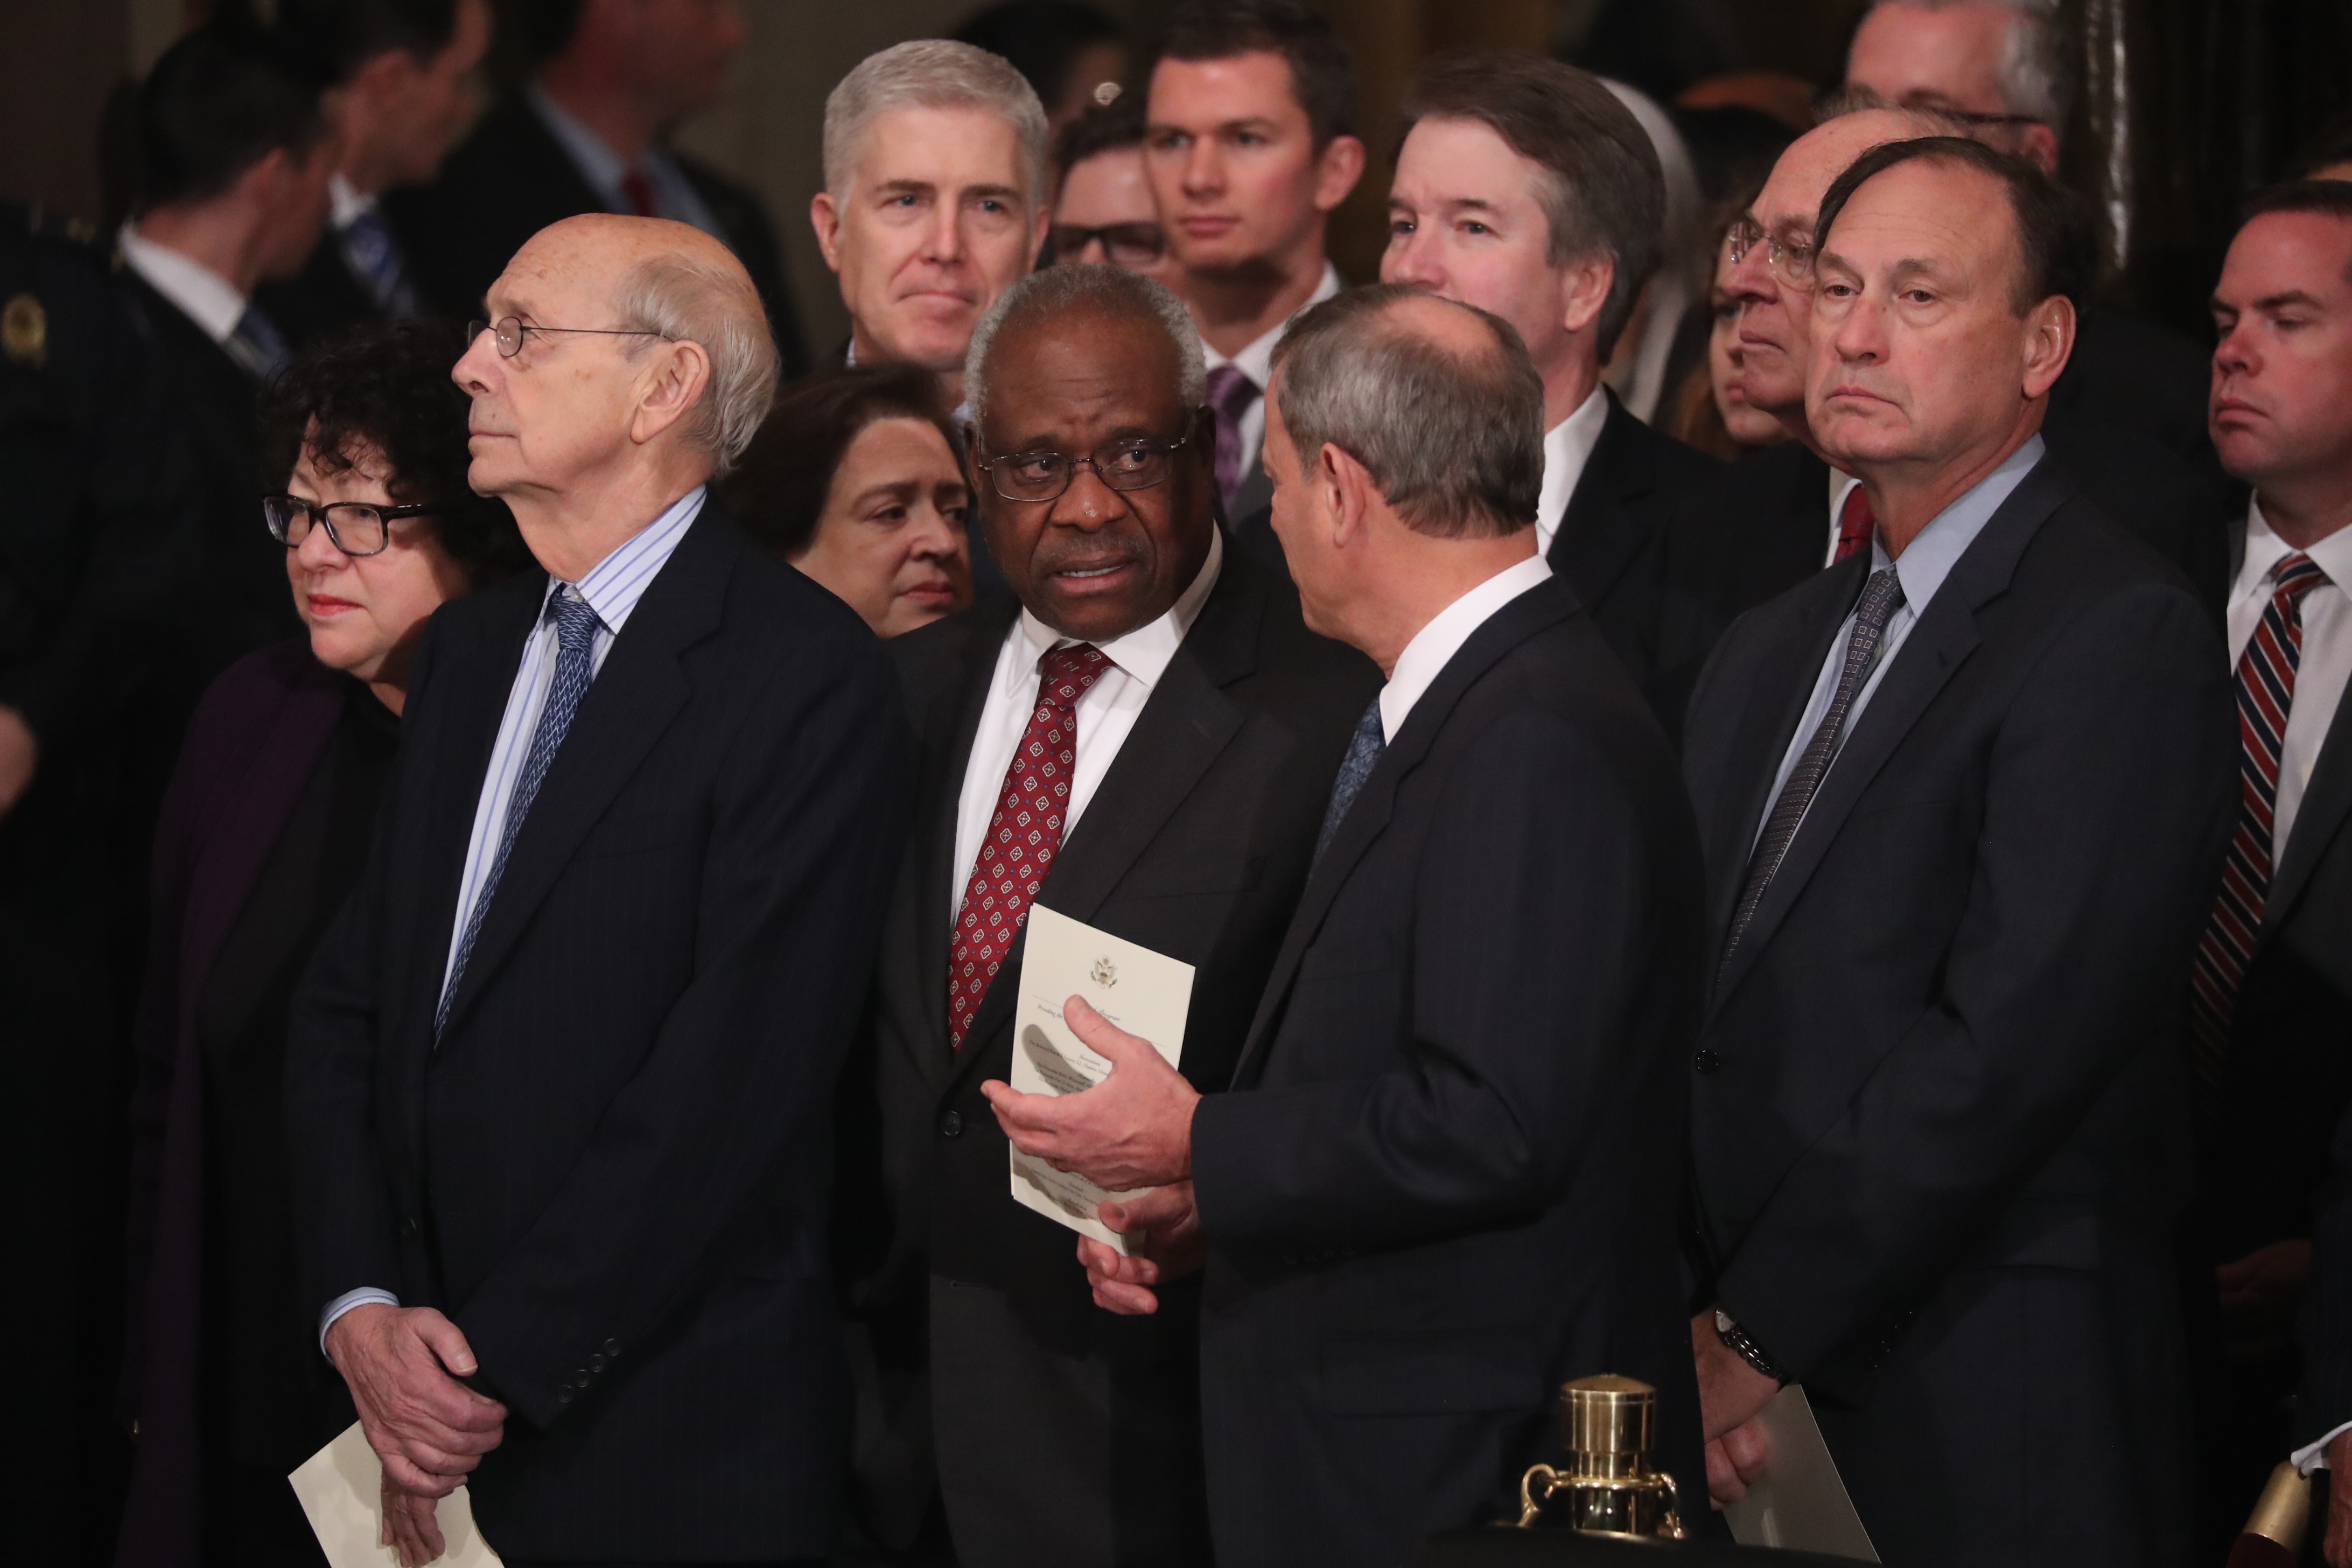 Justice Clarence Thomas, at center, awaits the arrival of former President George H.W. Bush's casket at the Capitol Rotunda on December 3, 2018 (Jonathan Ernst/Getty Images)